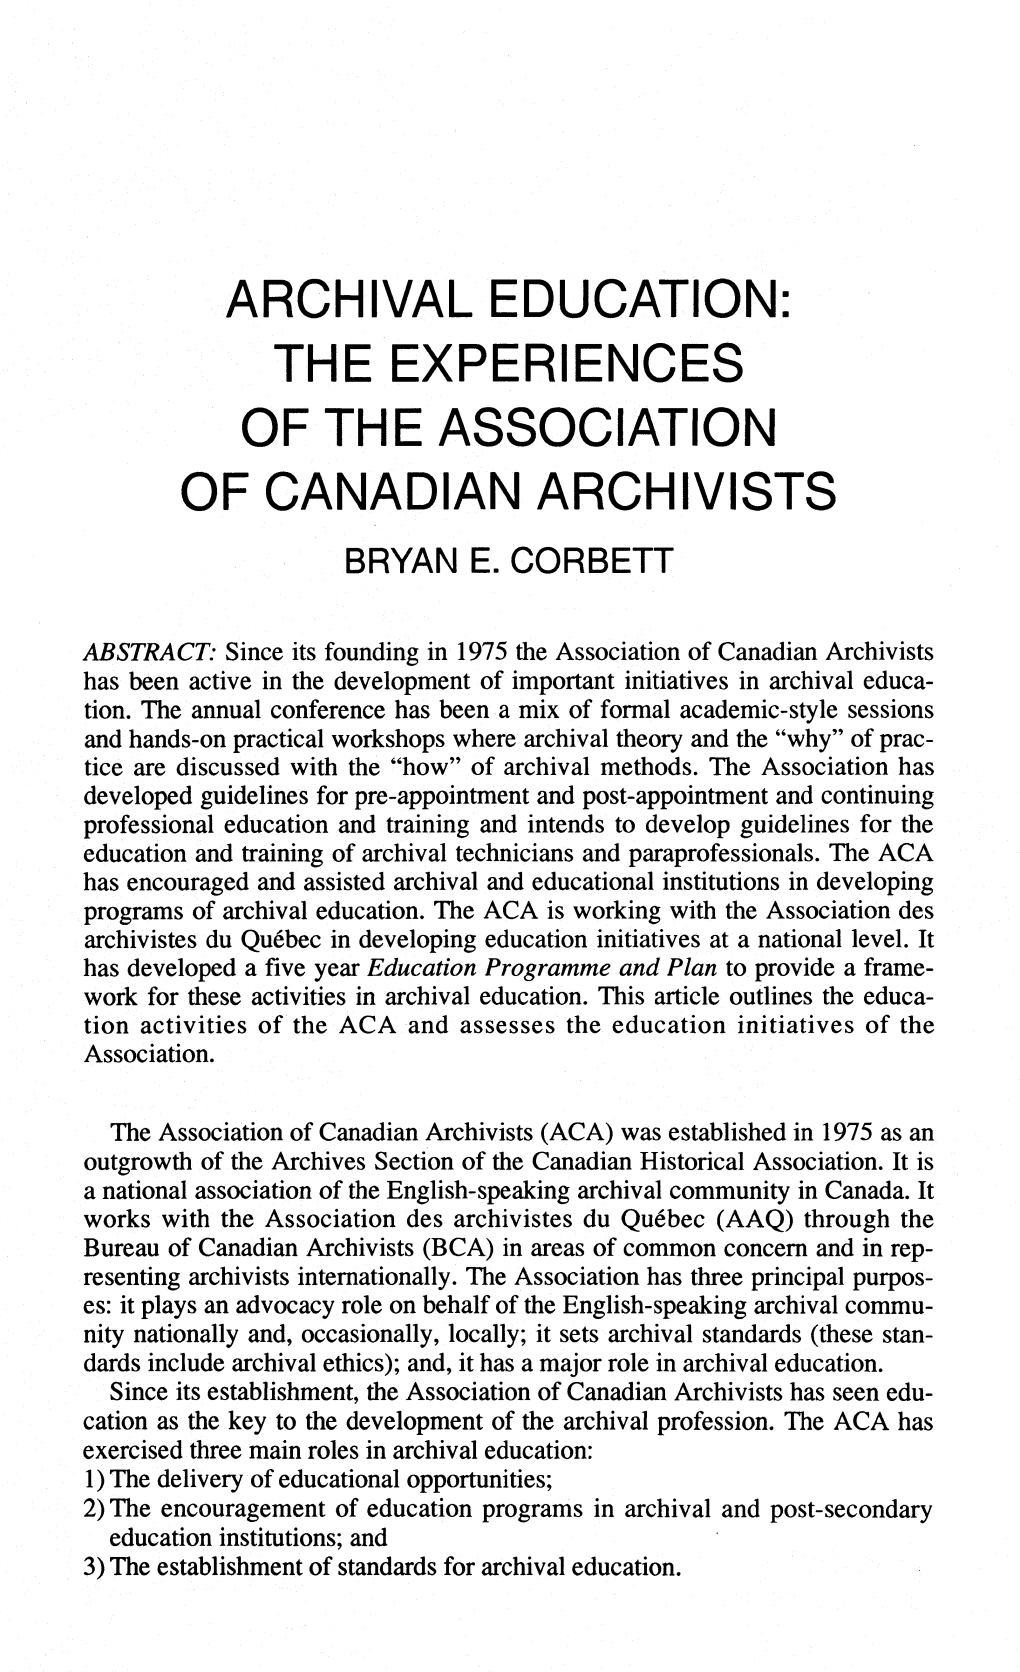 Of the Association of Canadian Archivists Bryan E